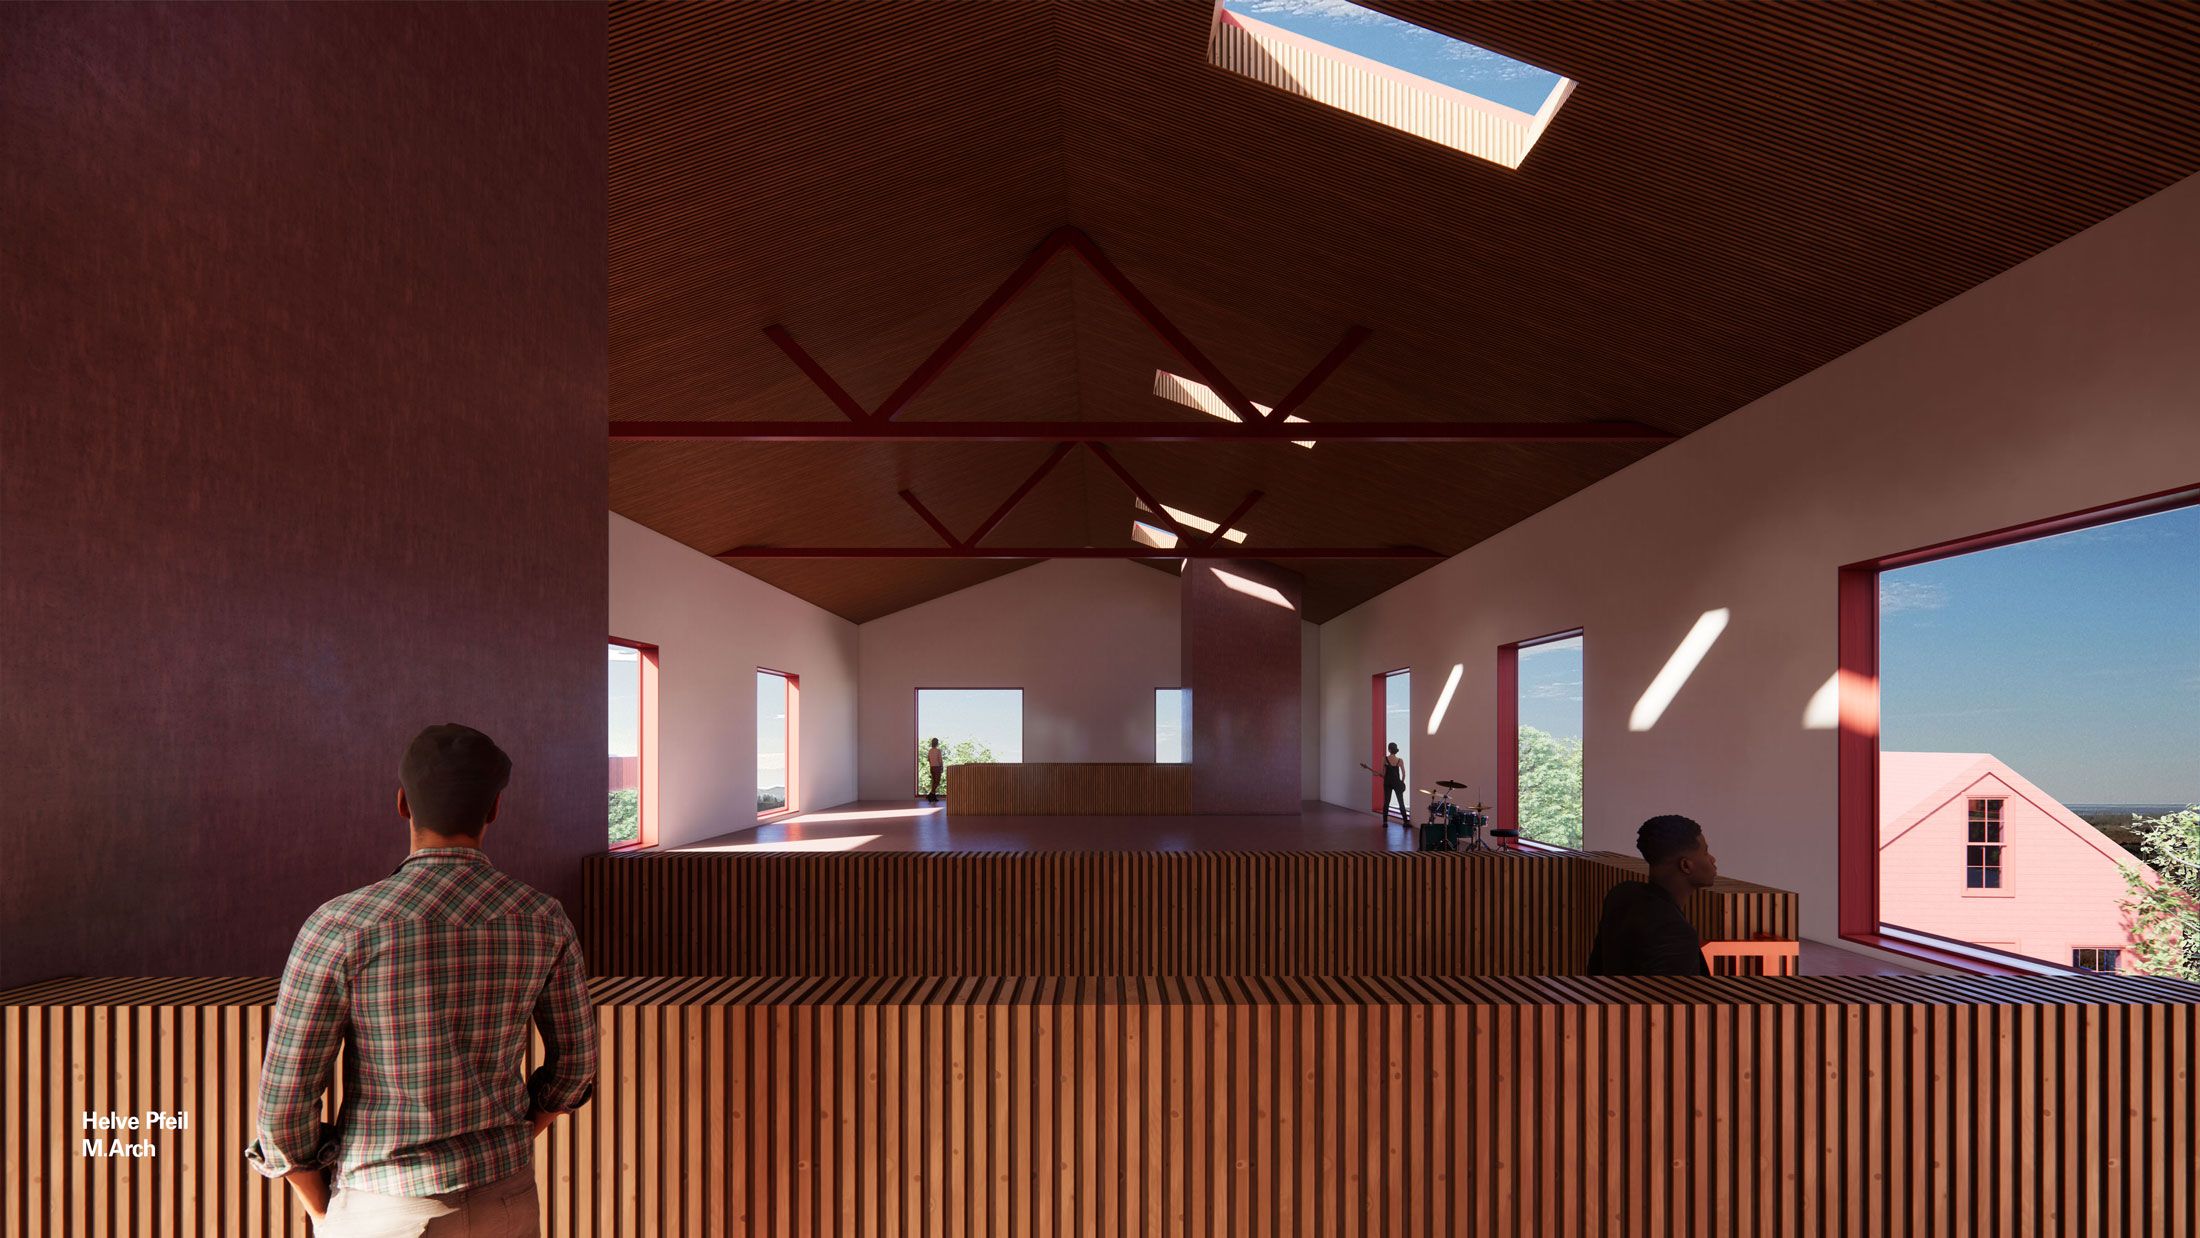 Adaptability - Adaptable Community Center: Architecture in a Rural Context – Interior Perspective